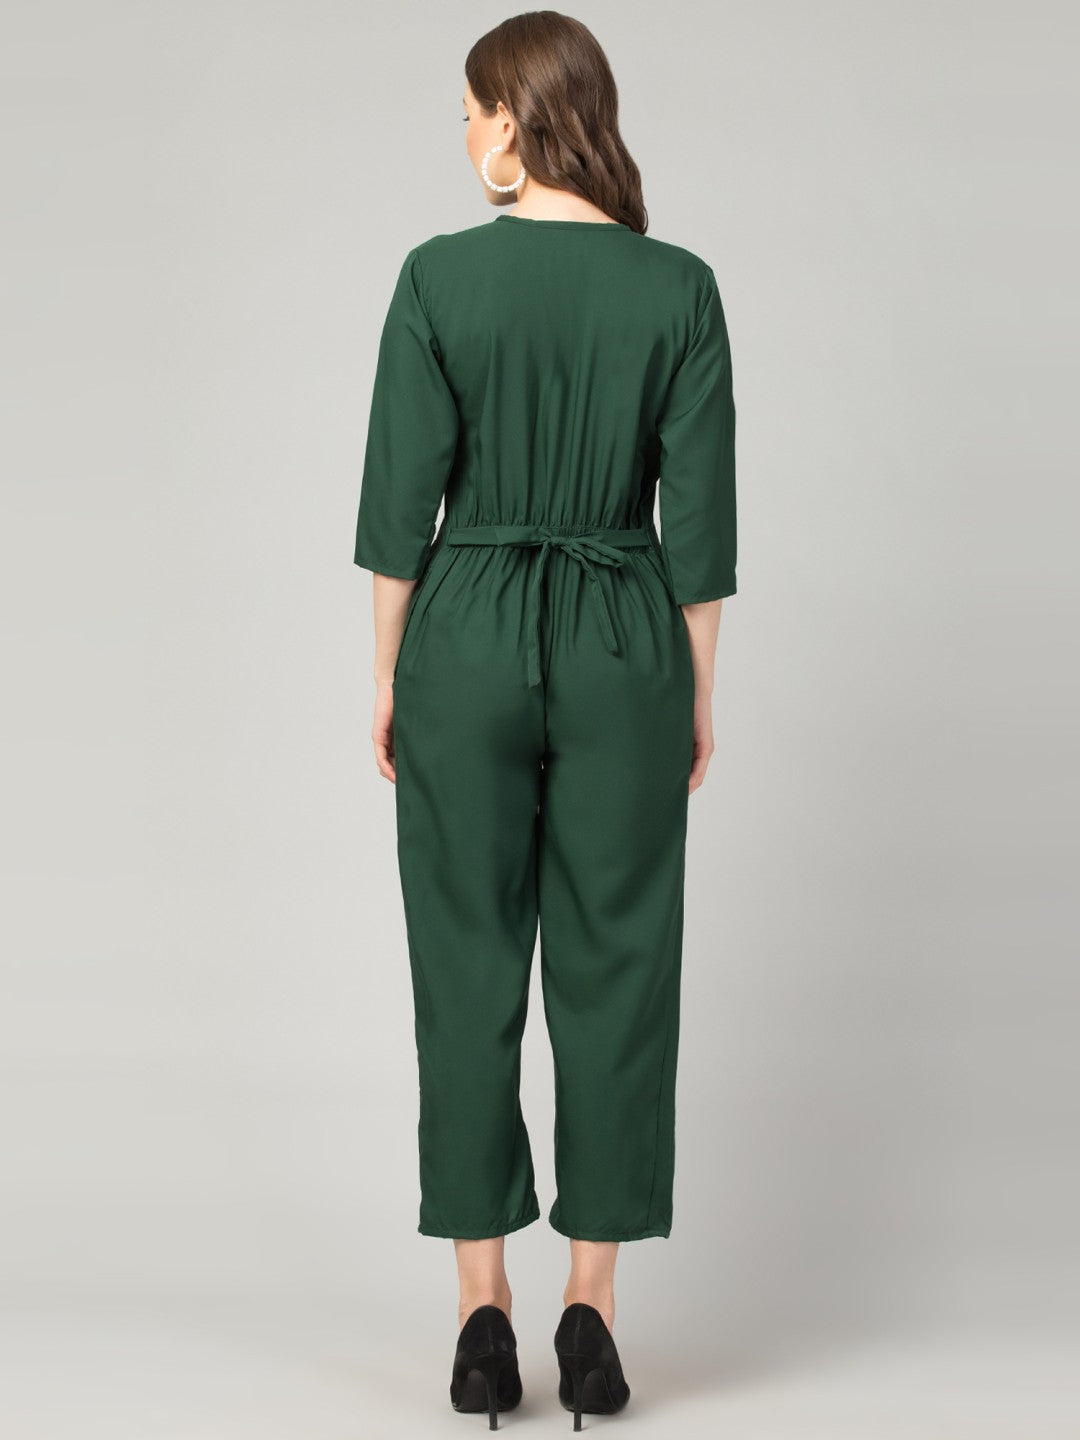 Pearl N Vera's Comfort & Style Crepe Jumpsuit with Button Detailing⭐